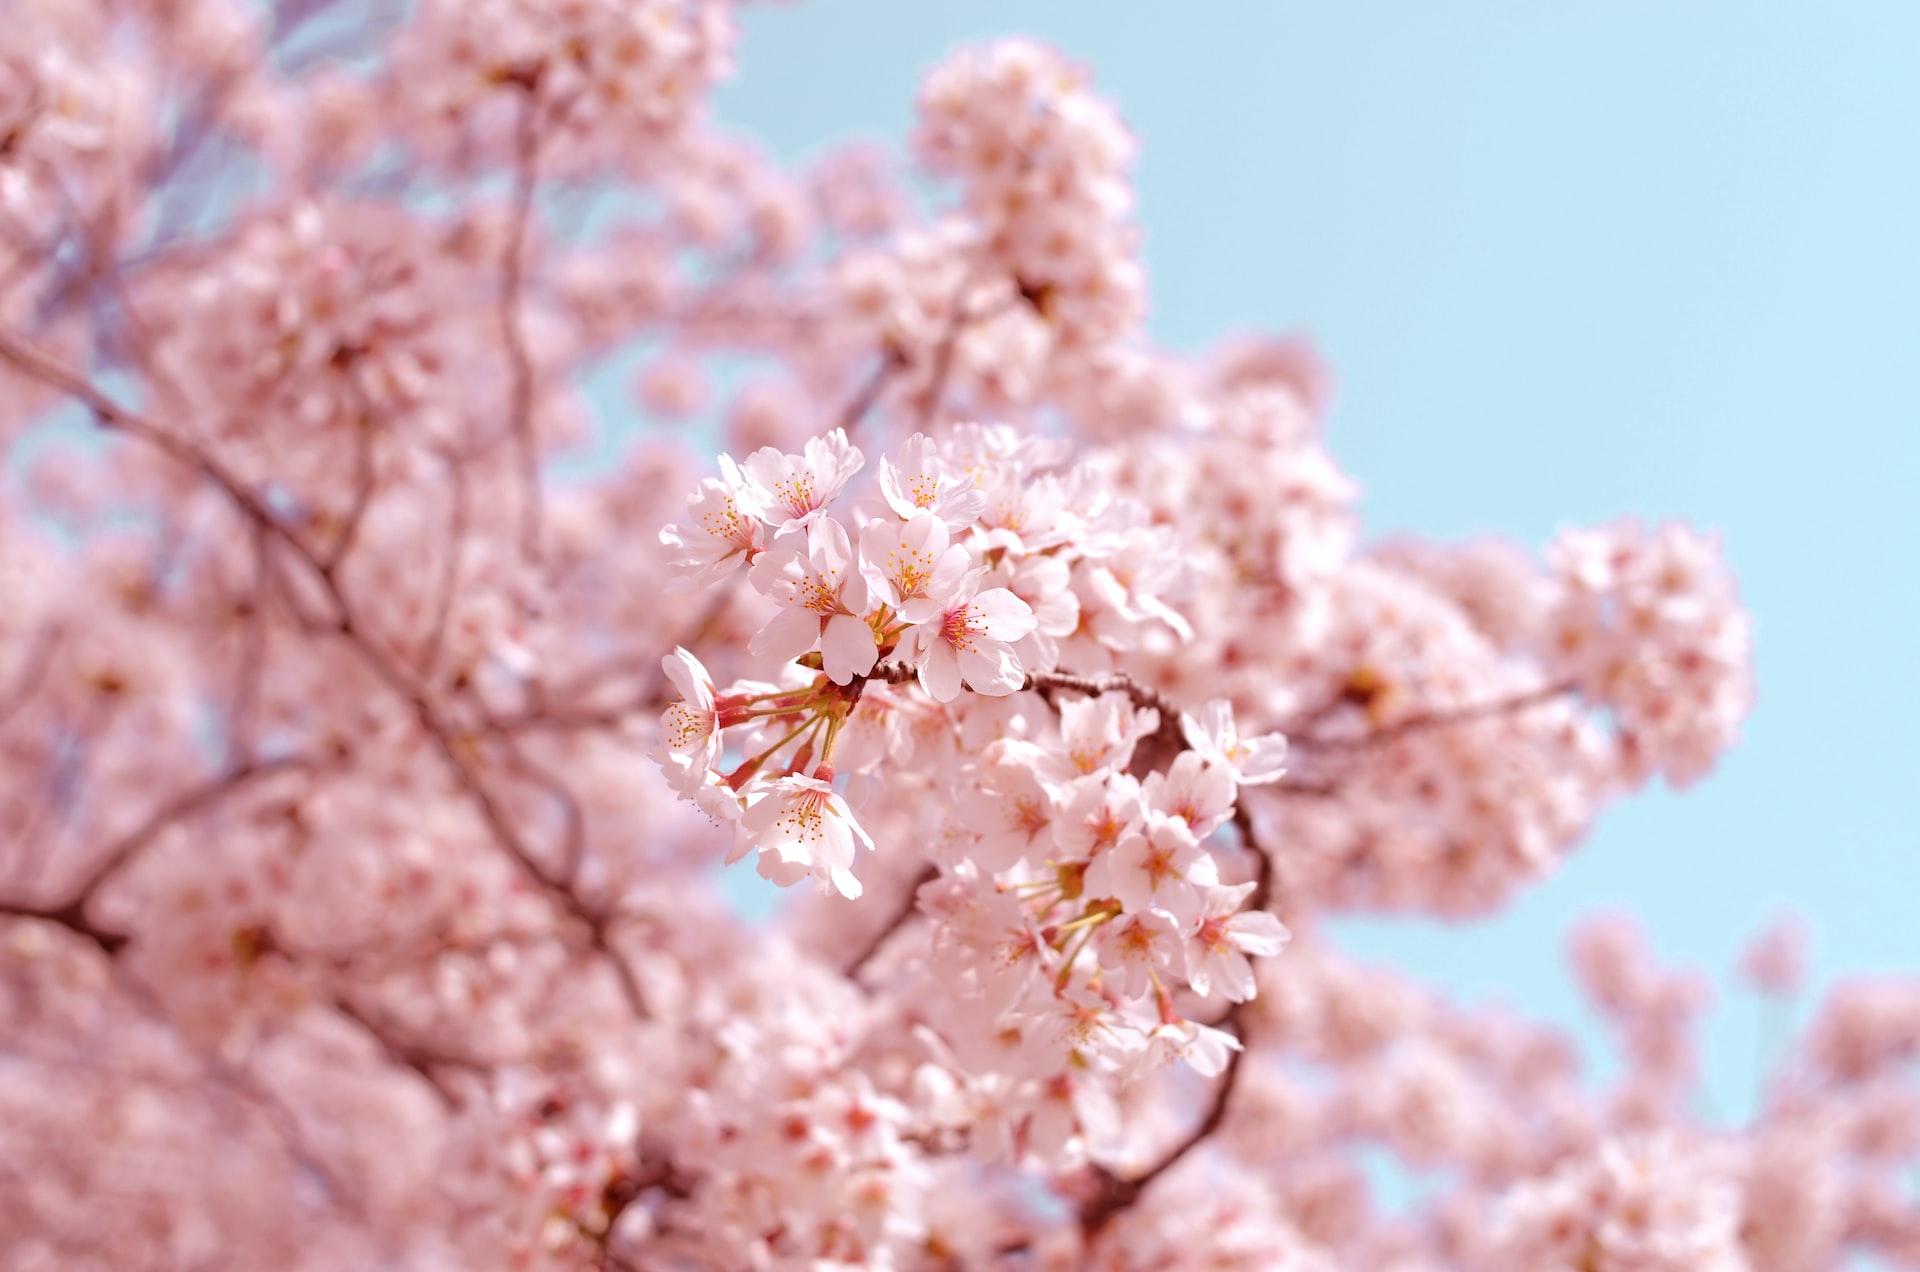 Cherry Blossom-Themed Travel Itineraries for Pune: Ideas for a Spring Vacation